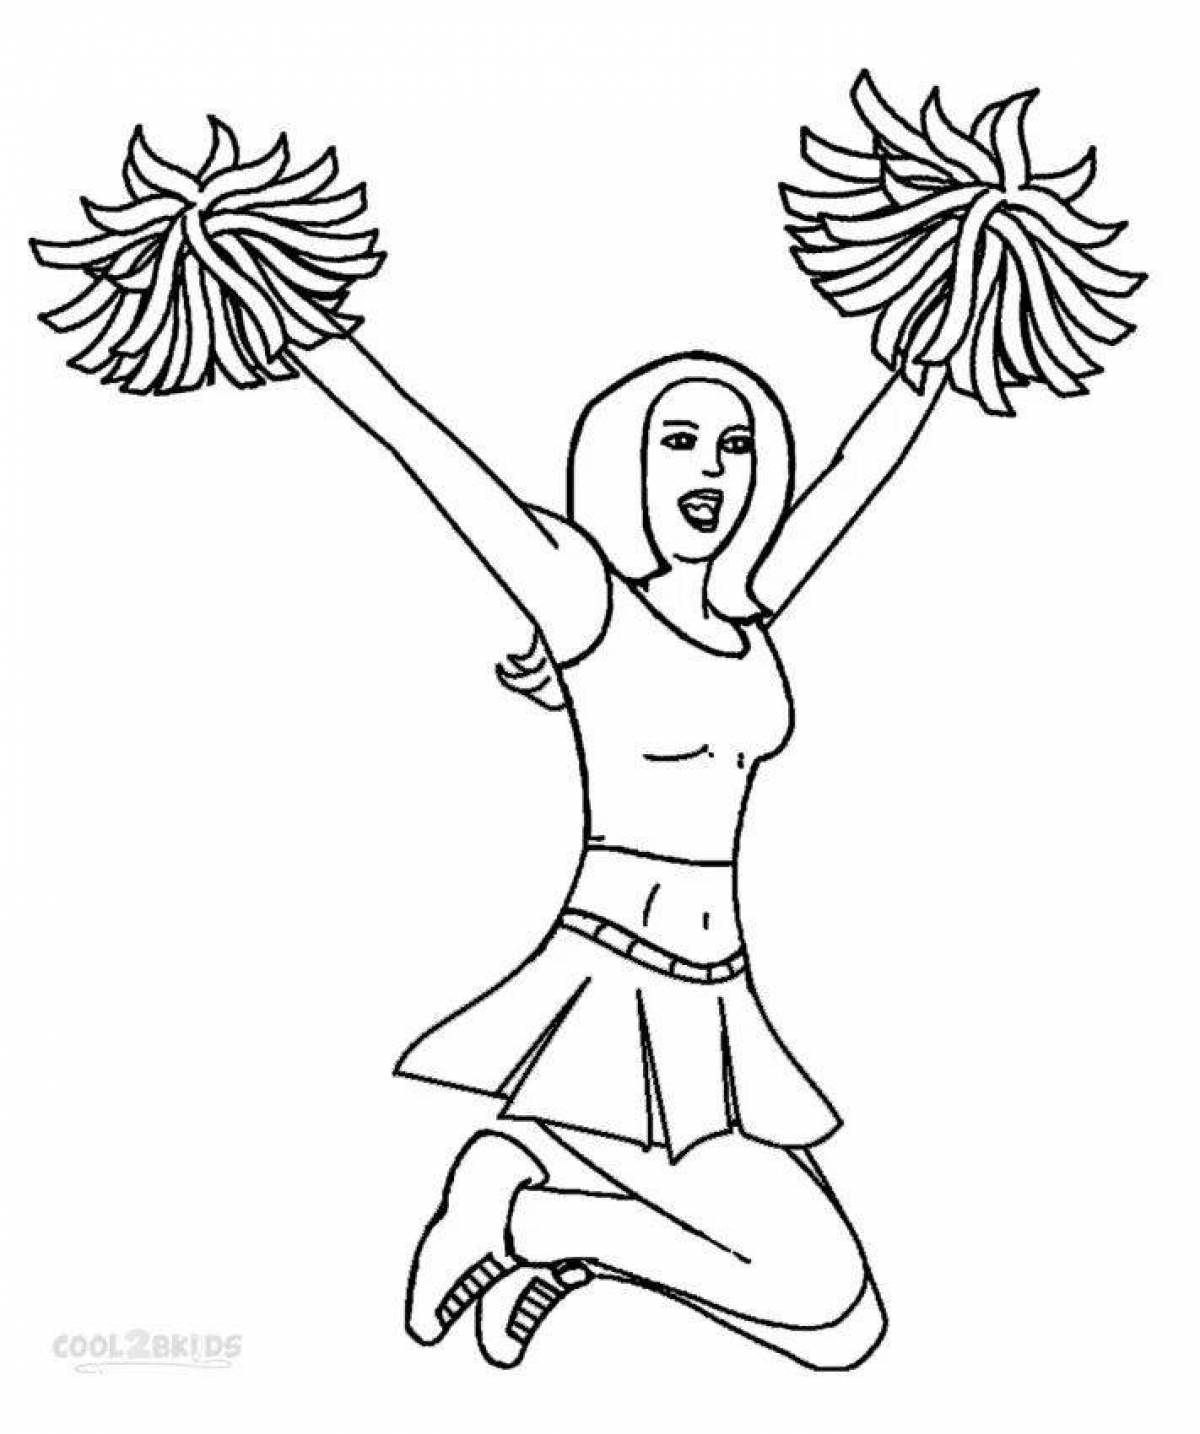 Coloring page cheerful cheerleader